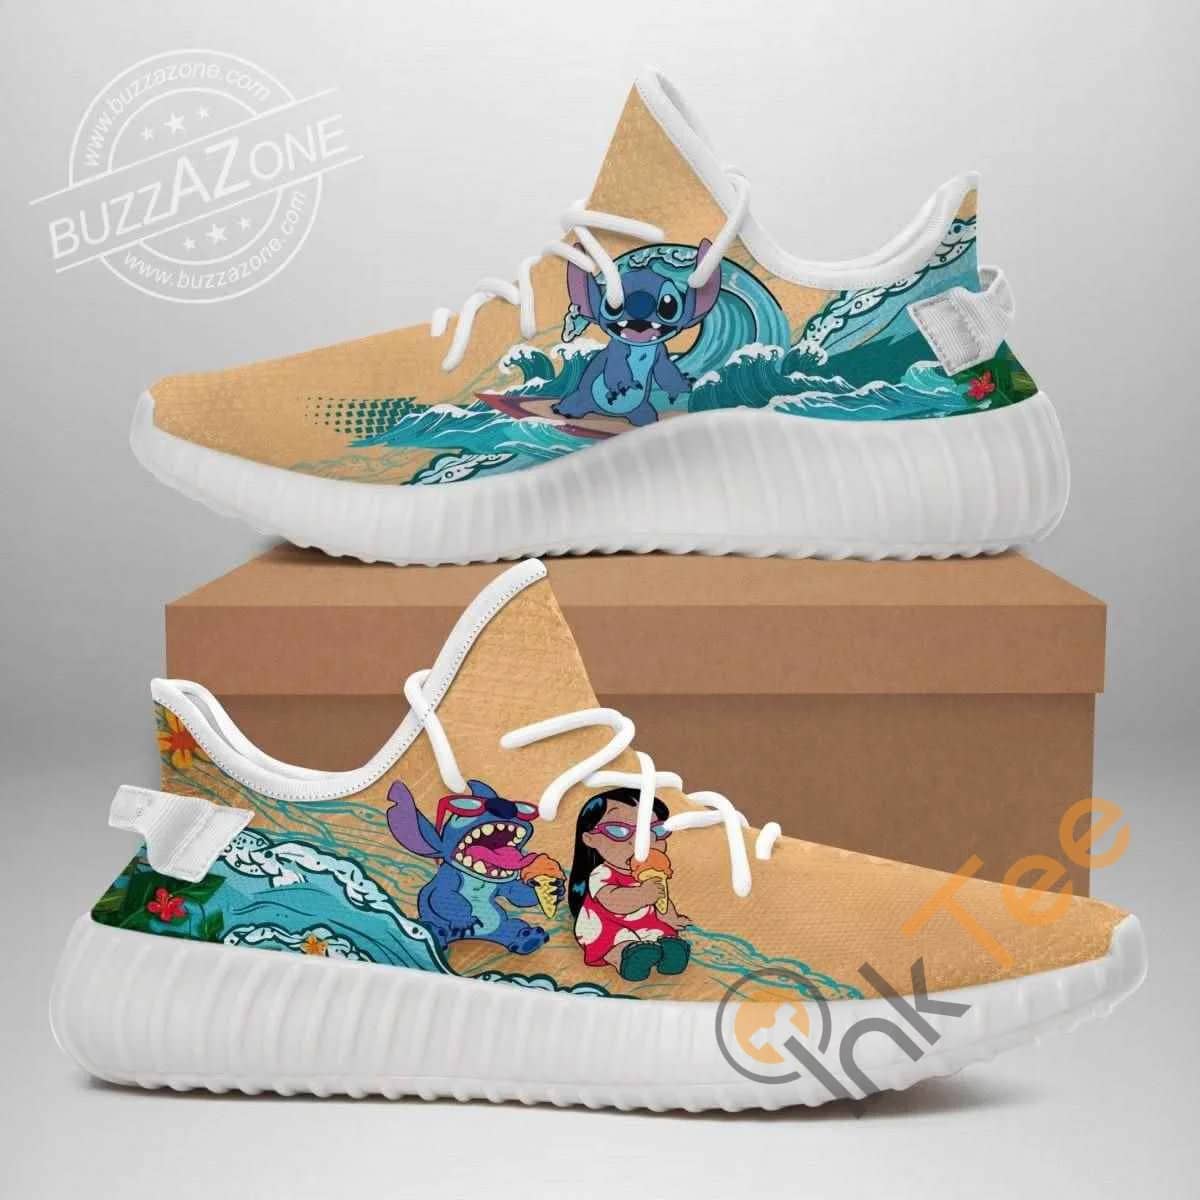 Lilo And Stitch Amazon Best Selling Yeezy Boost